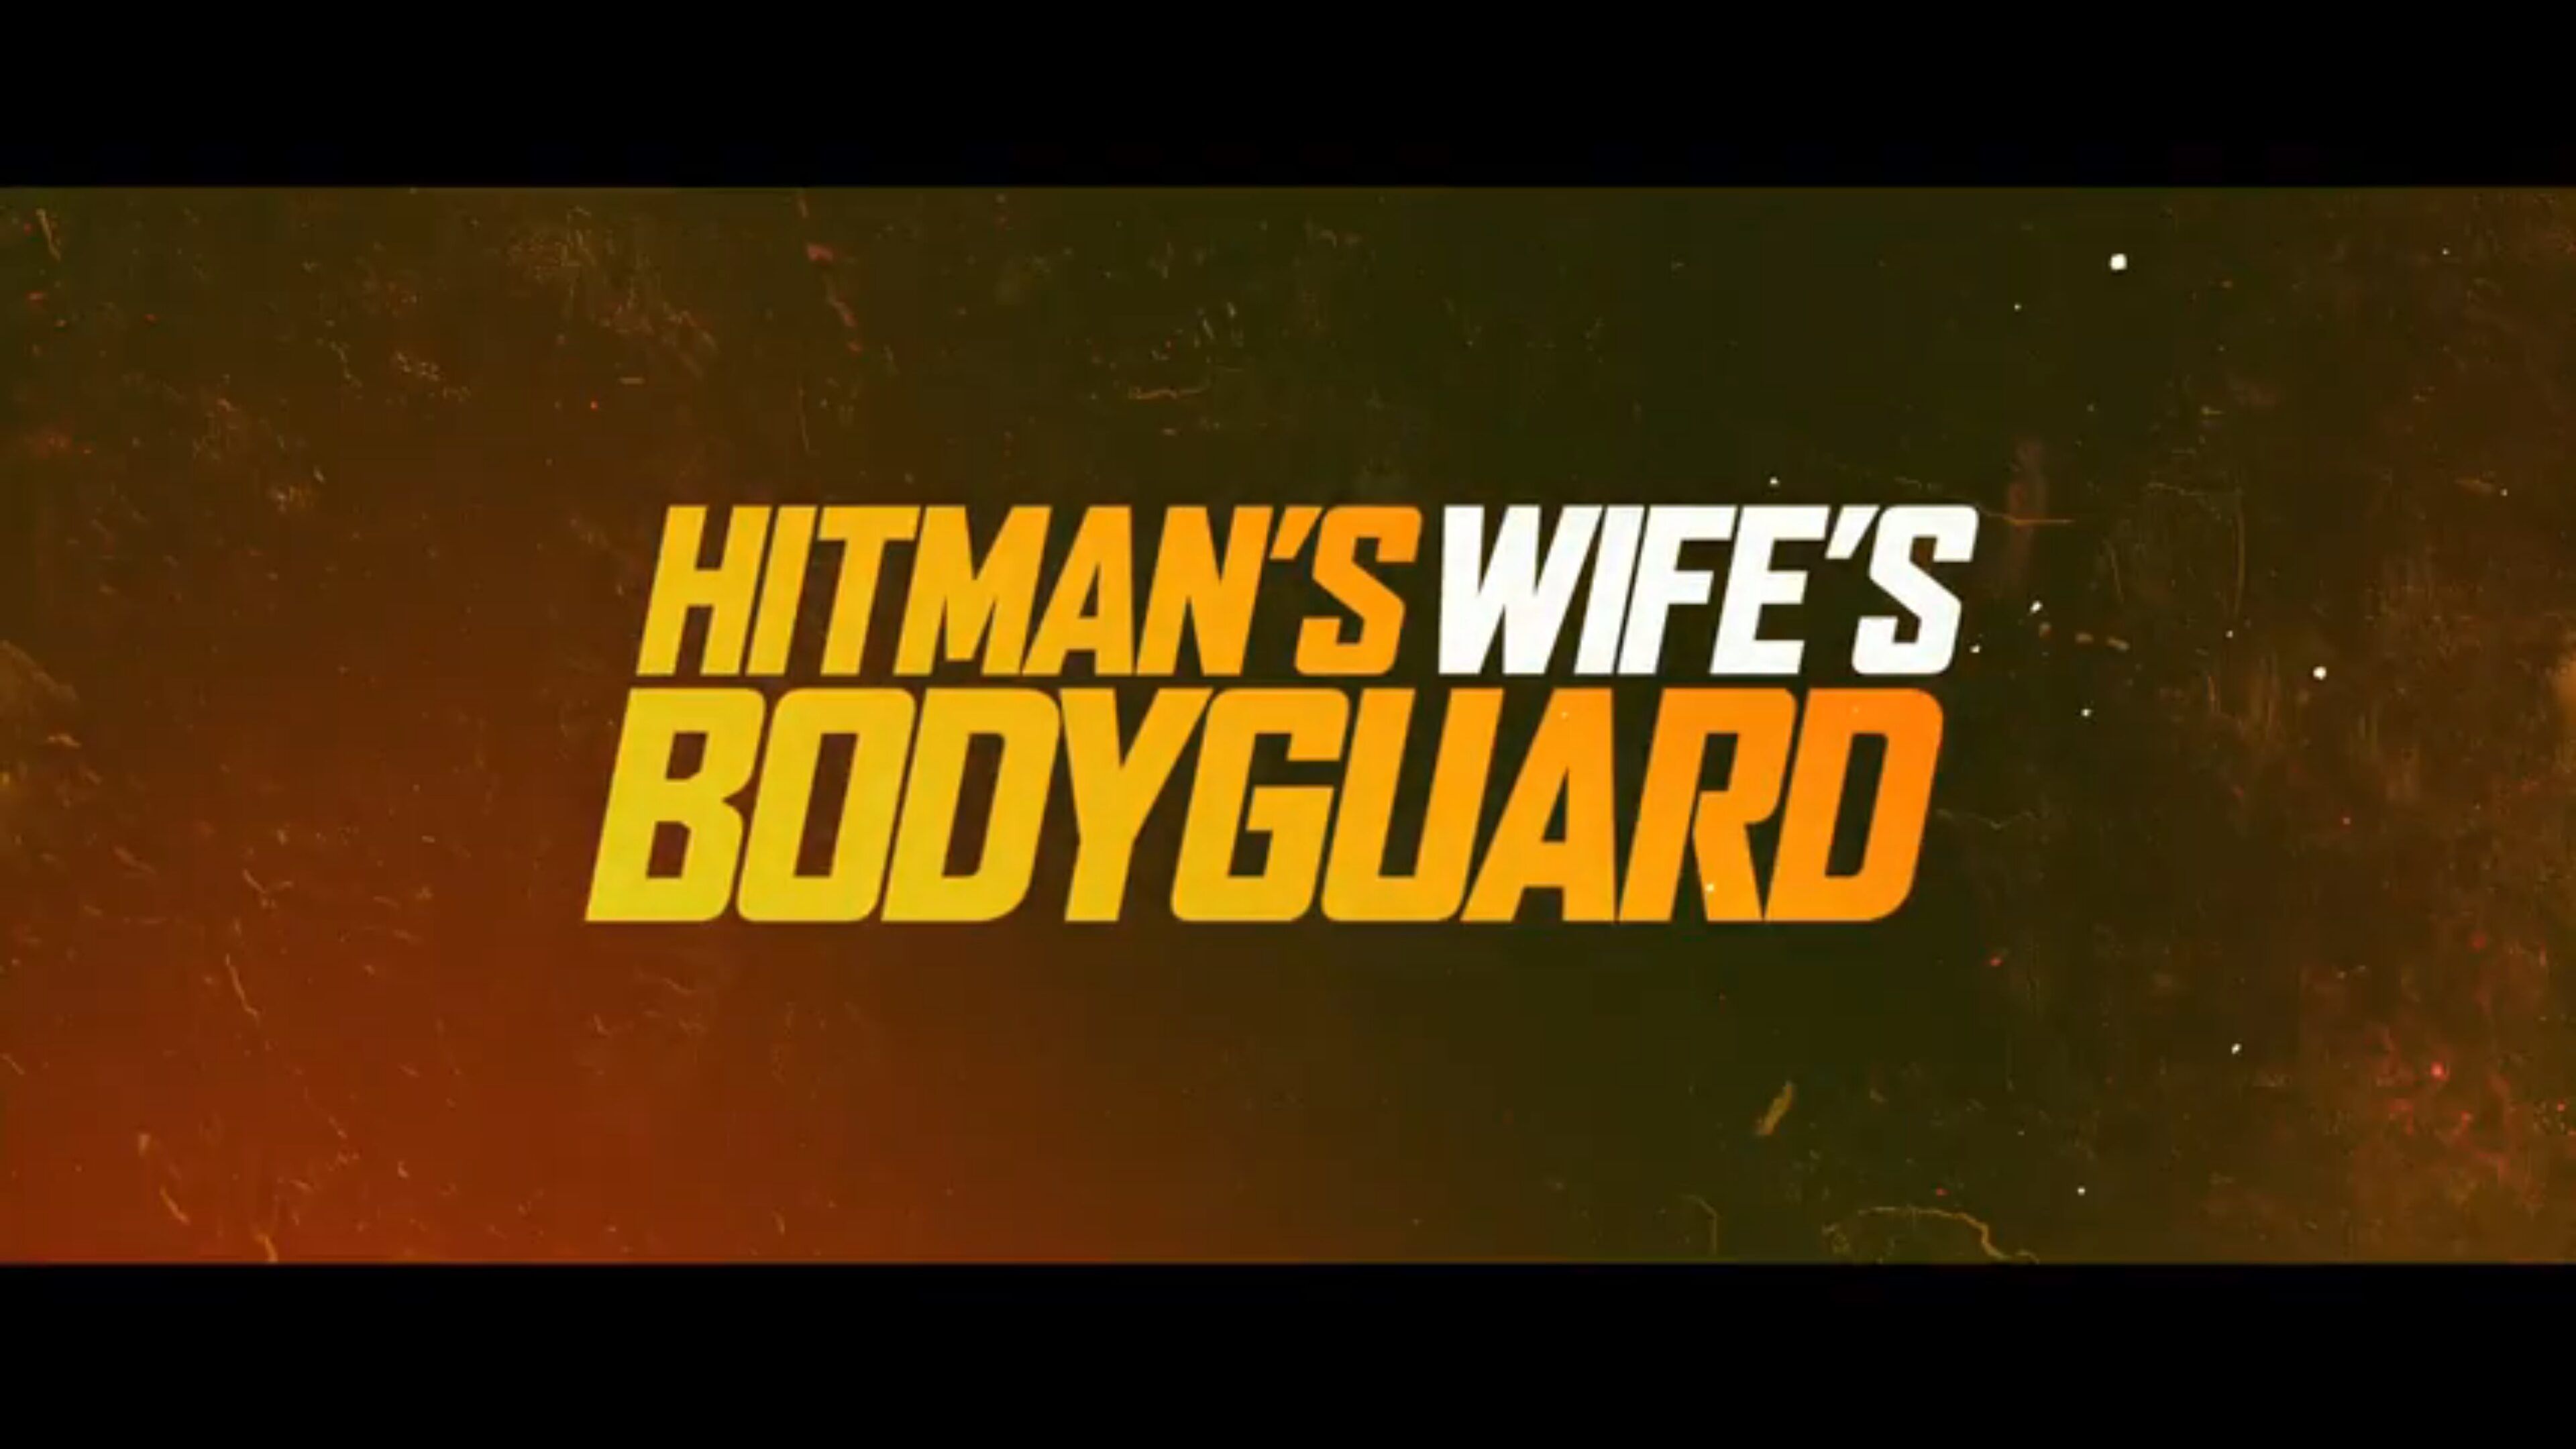 The Hitman's Wife's Bodyguard (2021) Summary (with Spoilers)